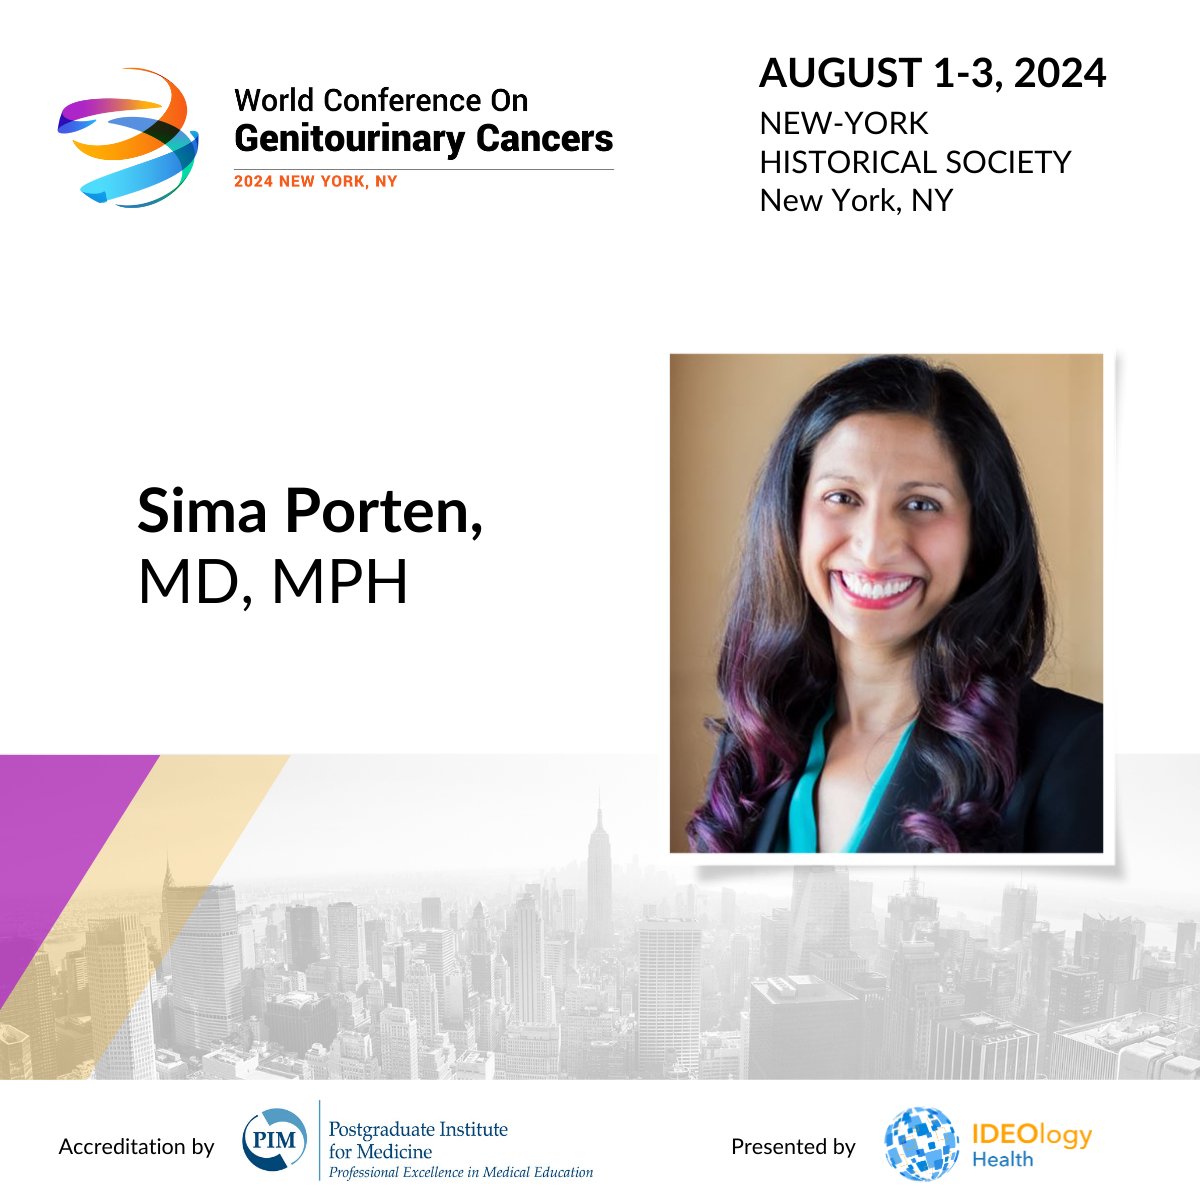 We are thrilled to announce that Dr. @SimaPorten is joining the esteemed faculty at #WorldGU24 this August in New York! 🗽 Get ready for an incredible gathering of thought leaders and colleagues at this 2-day #cme meeting. Learn more: hubs.la/Q02qCZ6v0 #urology #gucancers